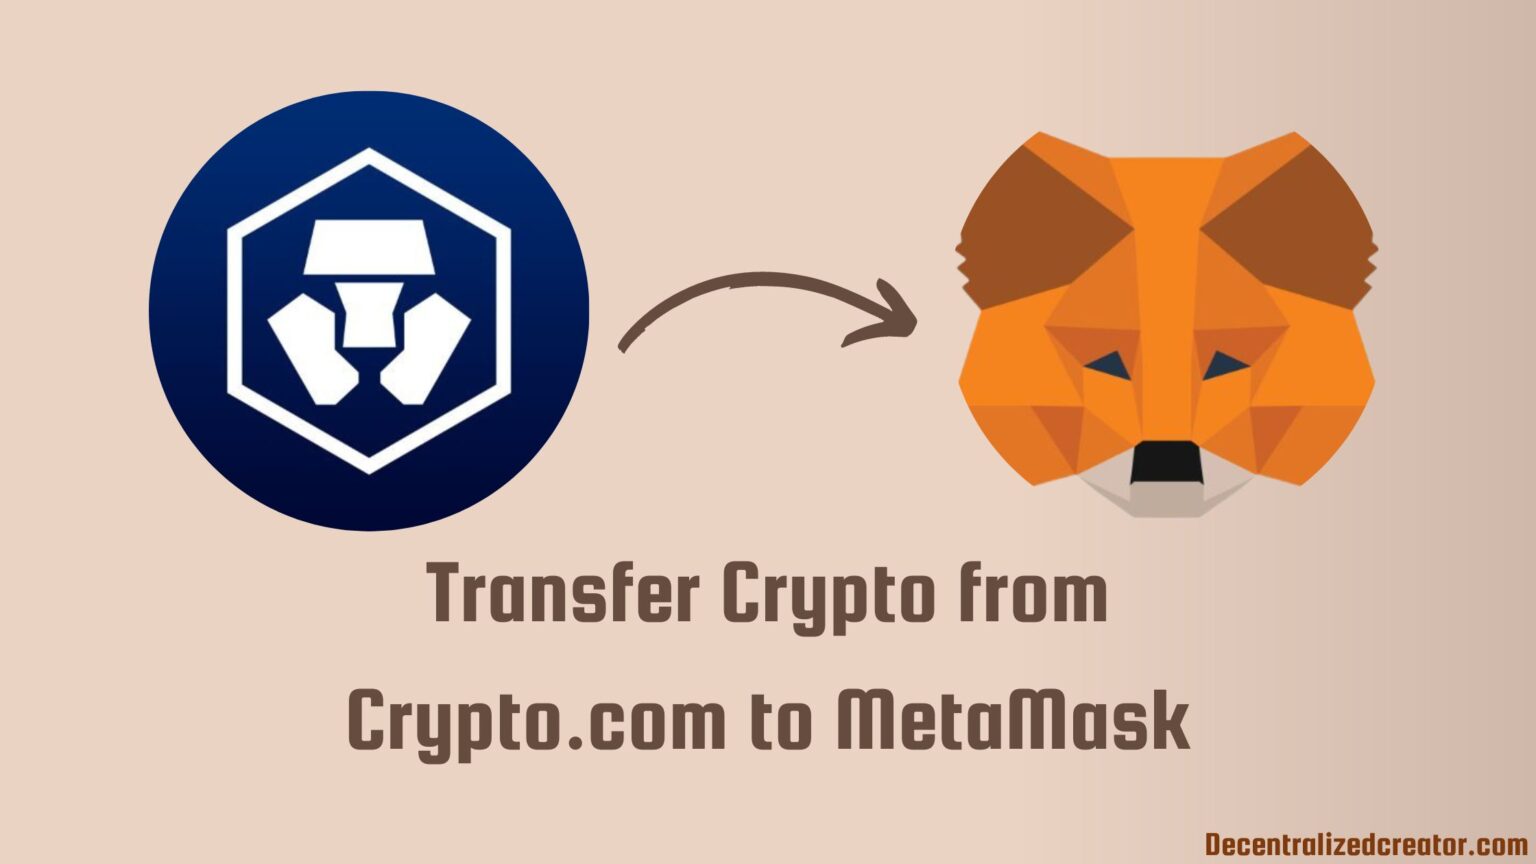 can you transfer from crypto.com to metamask